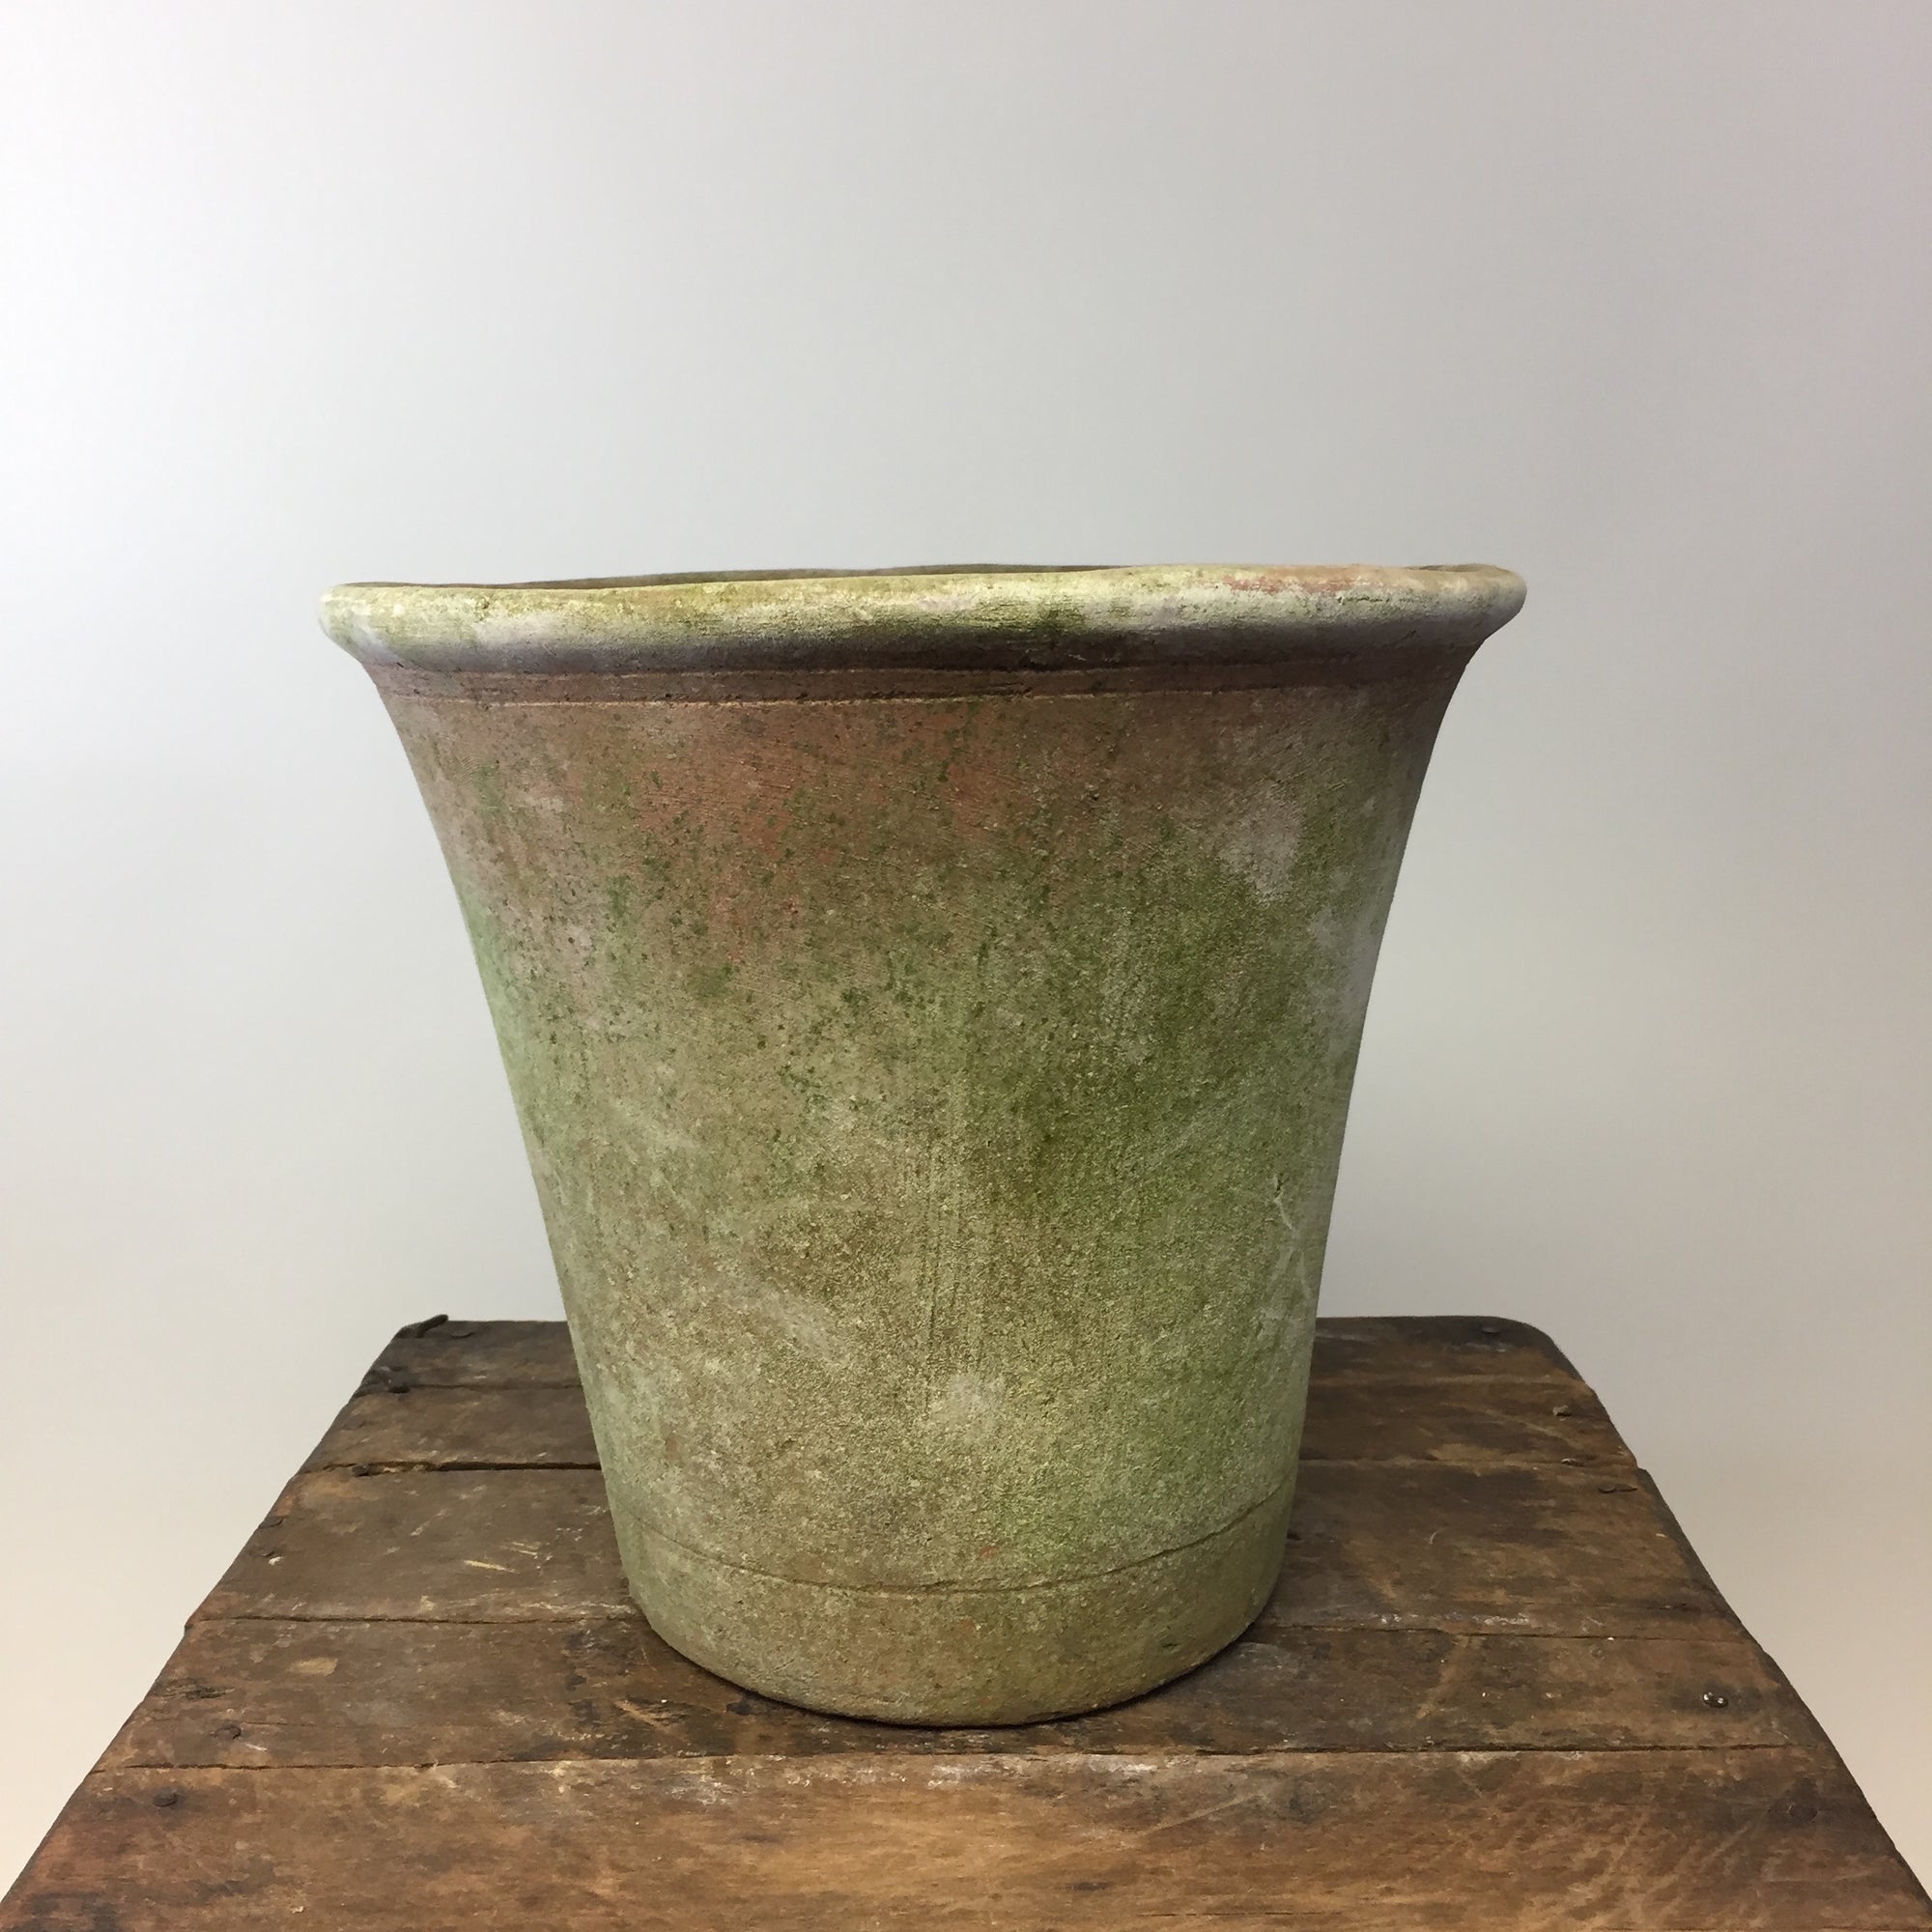 English Nursery Terracotta Planter with Aged Moss. 8"